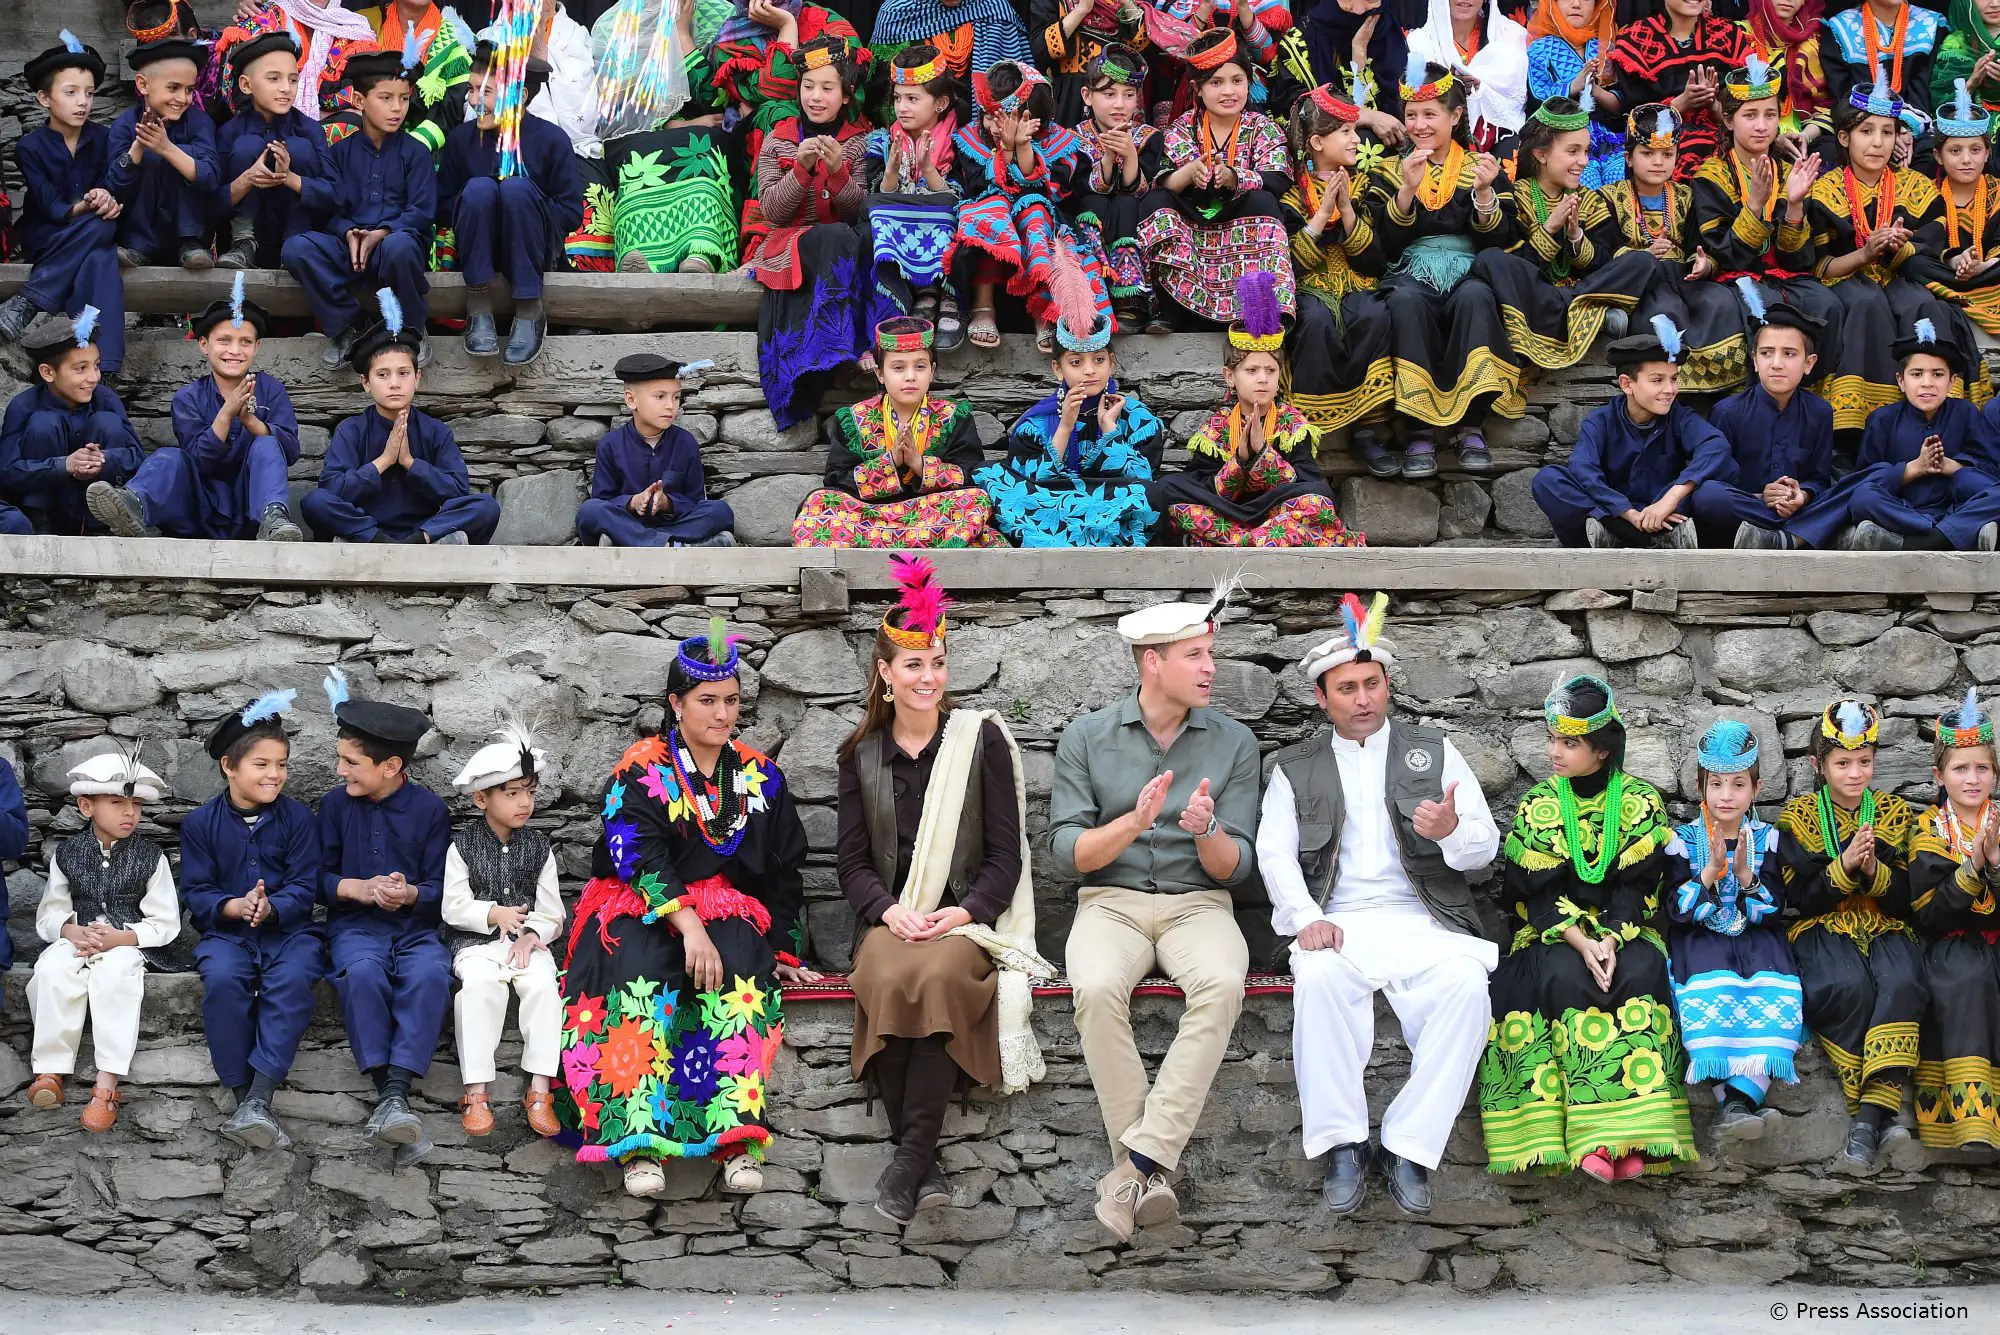 Duke and Duchess of Cambridge visited Kalash in Chitral during Pakistan visit1